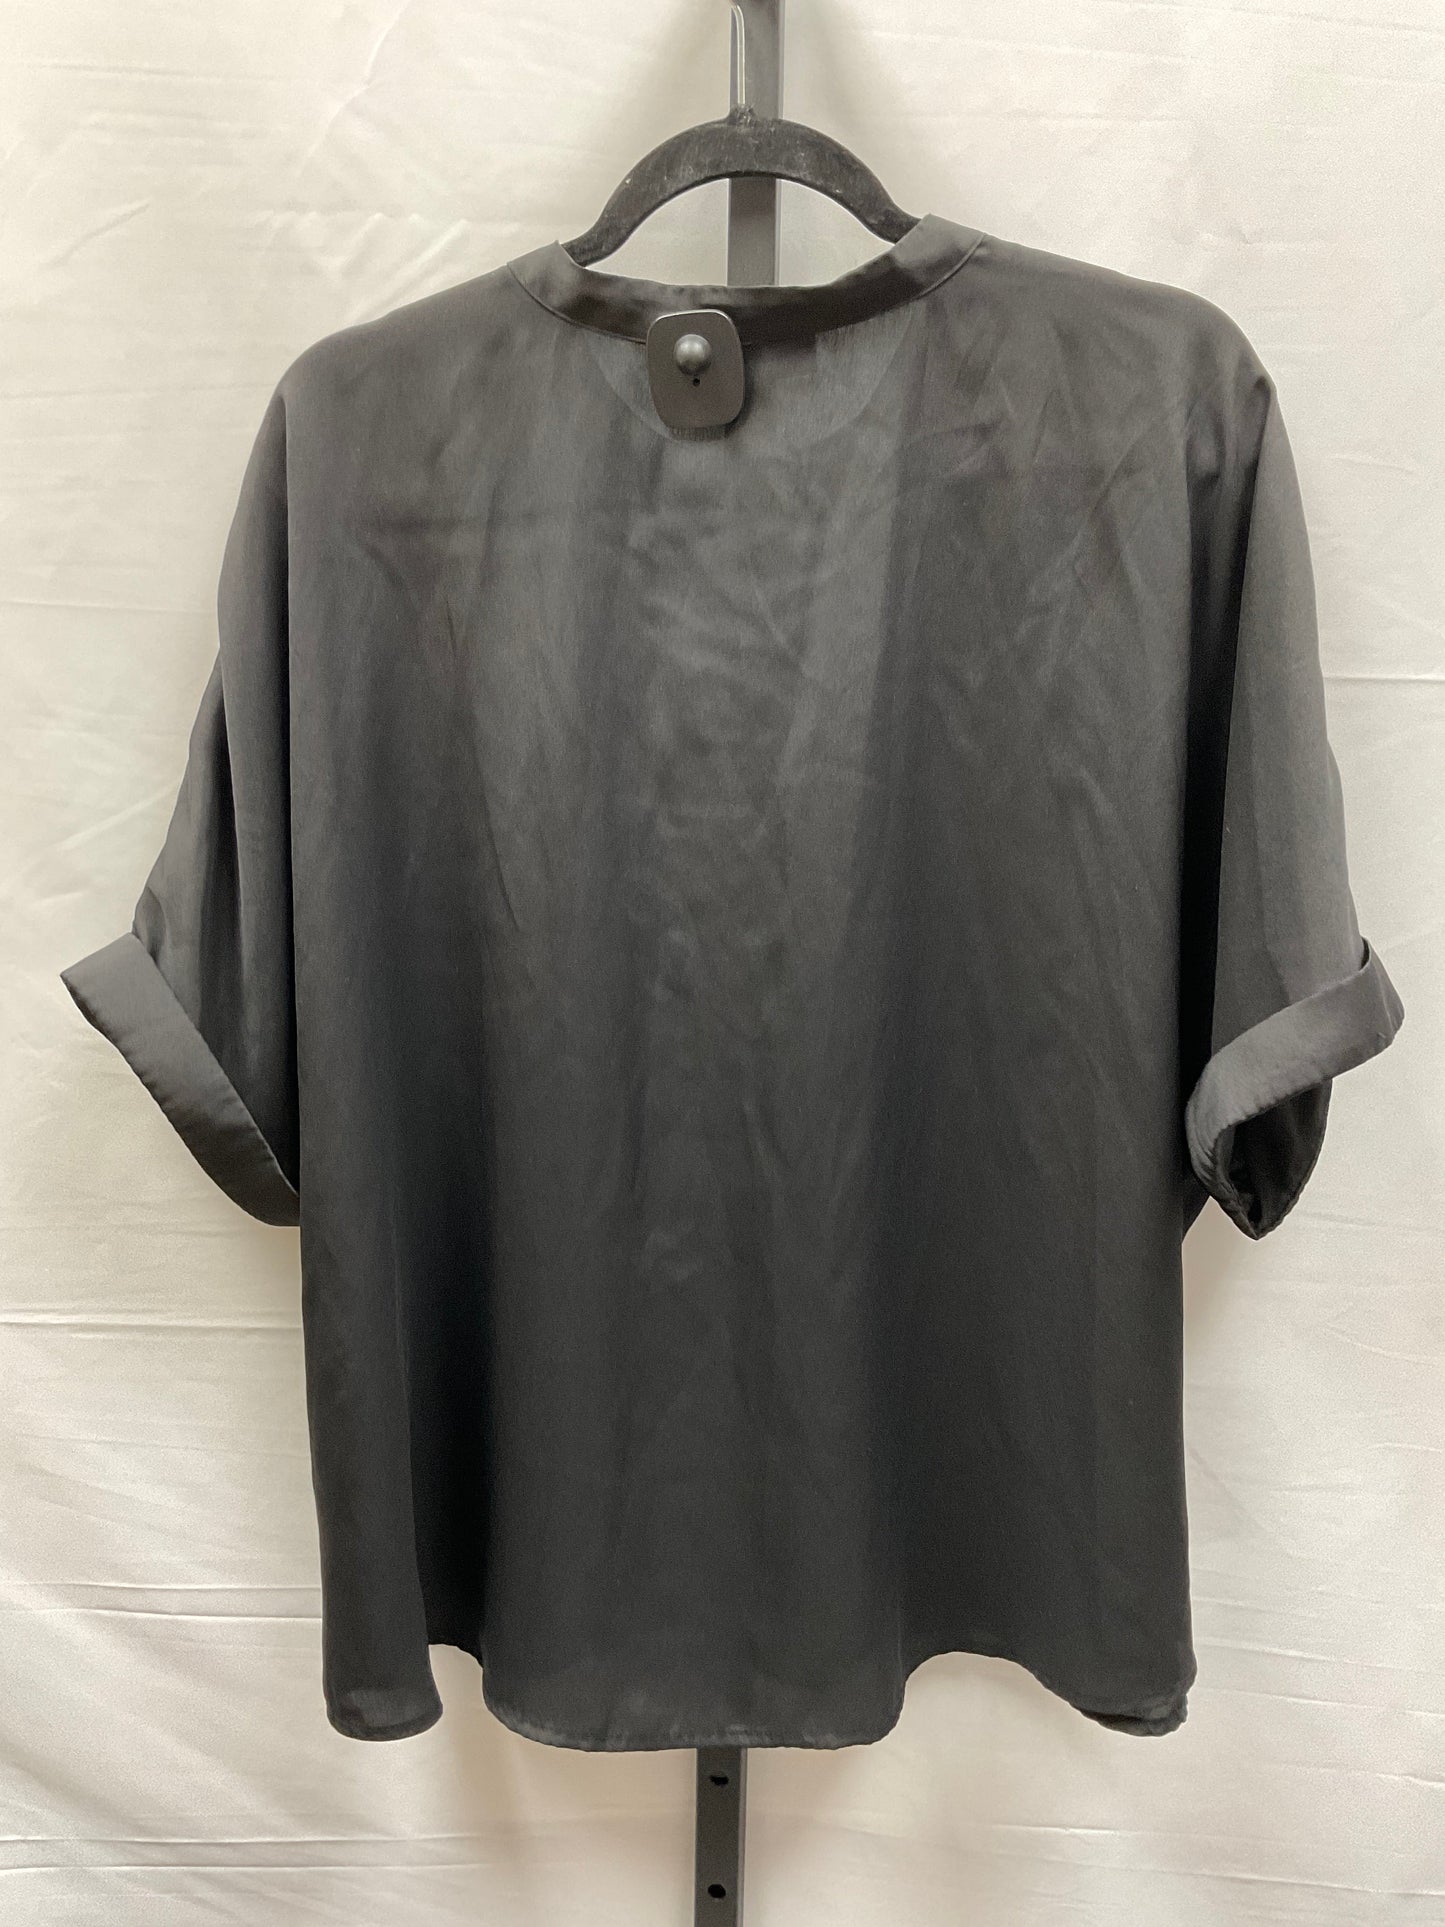 Black Top Short Sleeve Clothes Mentor, Size 1x